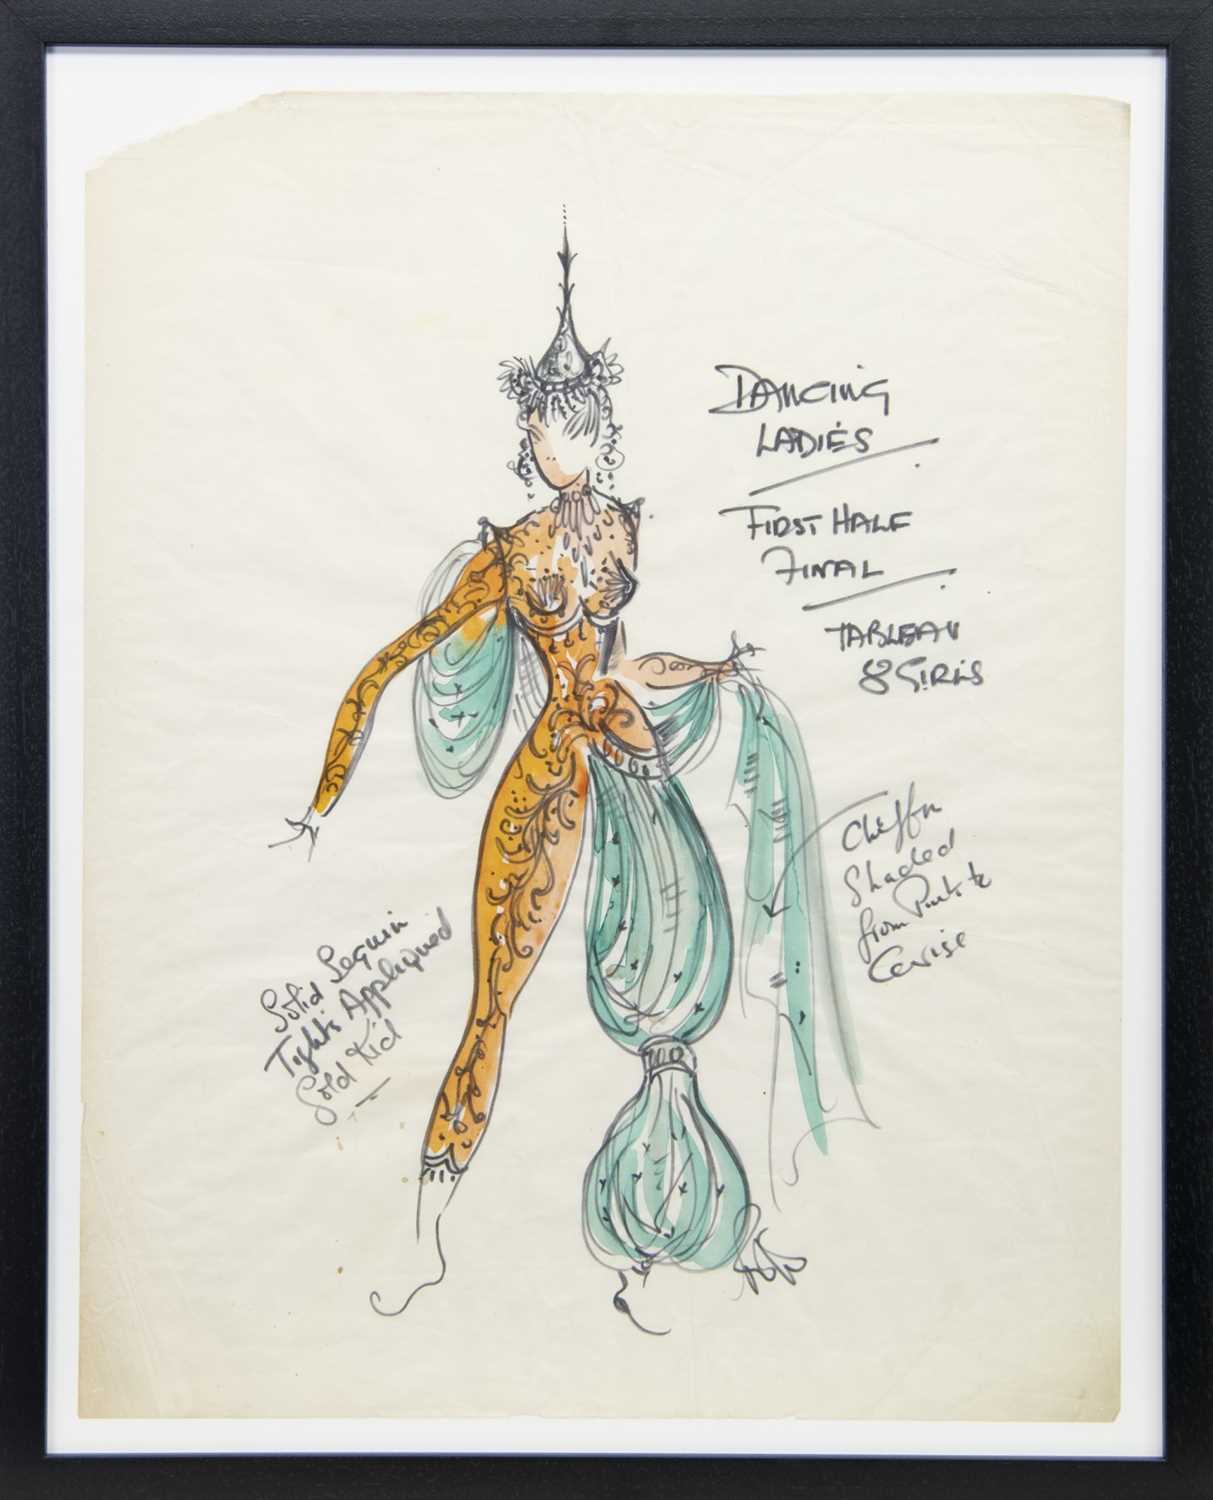 Lot 69 - COSTUME DESIGNS FOR THEATRE, A MIXED MEDIA BY ROBERT ST JOHN ROPER